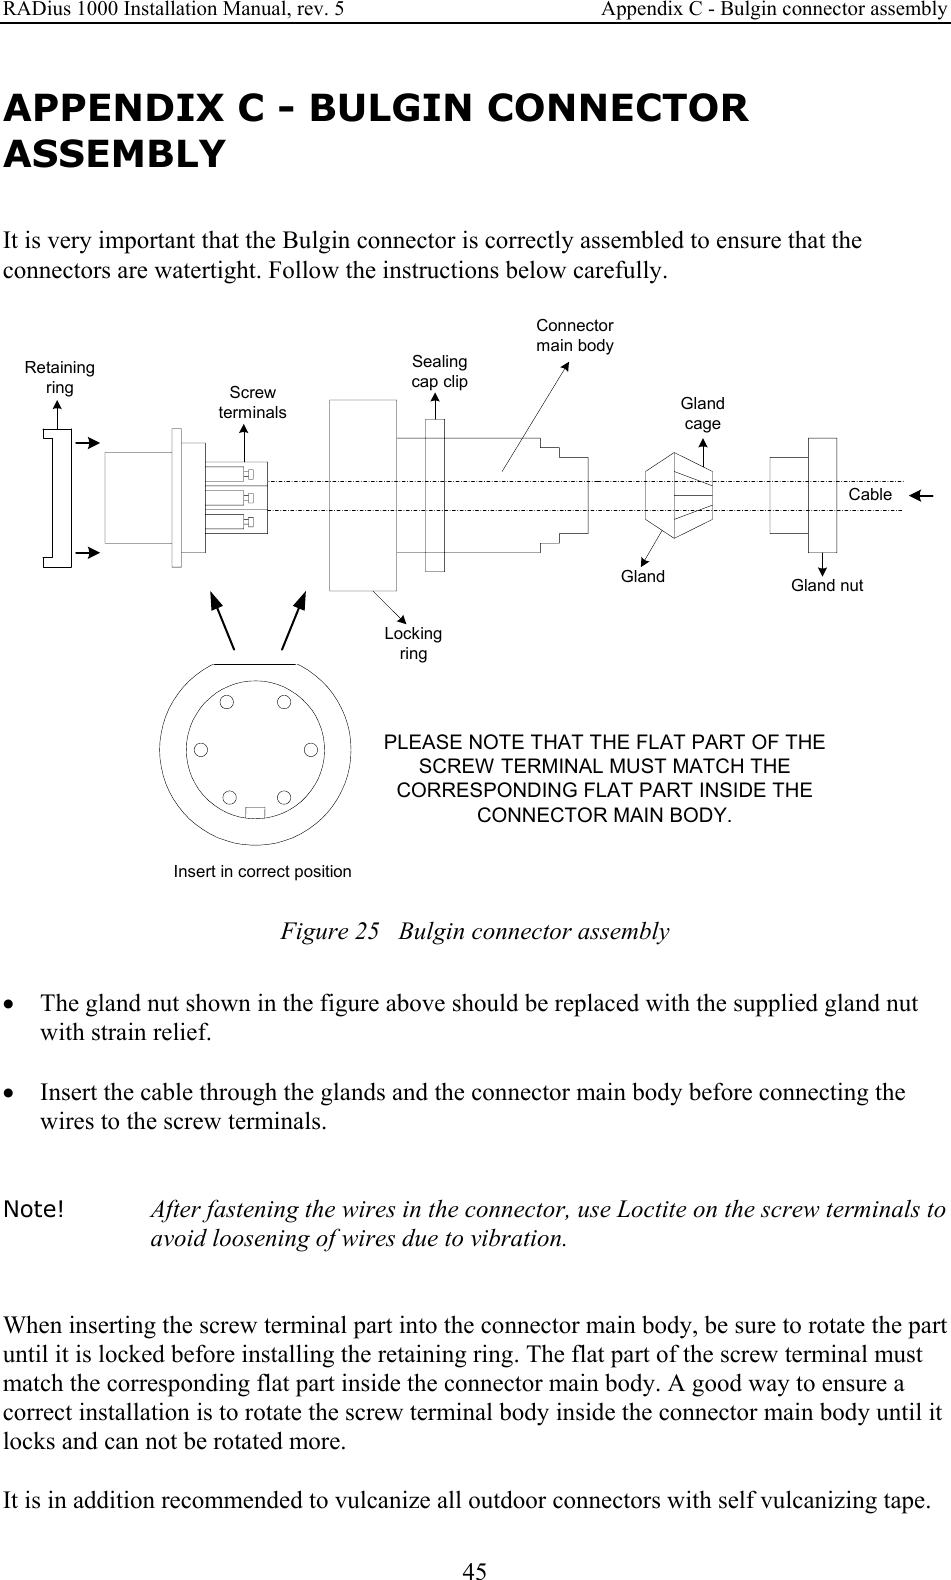 RADius 1000 Installation Manual, rev. 5    Appendix C - Bulgin connector assembly 45 APPENDIX C - BULGIN CONNECTOR ASSEMBLY It is very important that the Bulgin connector is correctly assembled to ensure that the connectors are watertight. Follow the instructions below carefully.  CableGland nutGlandGlandcageSealingcap clipScrewterminalsLockingringRetainingringInsert in correct positionPLEASE NOTE THAT THE FLAT PART OF THESCREW TERMINAL MUST MATCH THECORRESPONDING FLAT PART INSIDE THECONNECTOR MAIN BODY.Connectormain body Figure 25   Bulgin connector assembly  • The gland nut shown in the figure above should be replaced with the supplied gland nut with strain relief.   • Insert the cable through the glands and the connector main body before connecting the wires to the screw terminals.    Note! After fastening the wires in the connector, use Loctite on the screw terminals to avoid loosening of wires due to vibration.   When inserting the screw terminal part into the connector main body, be sure to rotate the part until it is locked before installing the retaining ring. The flat part of the screw terminal must match the corresponding flat part inside the connector main body. A good way to ensure a correct installation is to rotate the screw terminal body inside the connector main body until it locks and can not be rotated more.  It is in addition recommended to vulcanize all outdoor connectors with self vulcanizing tape. 